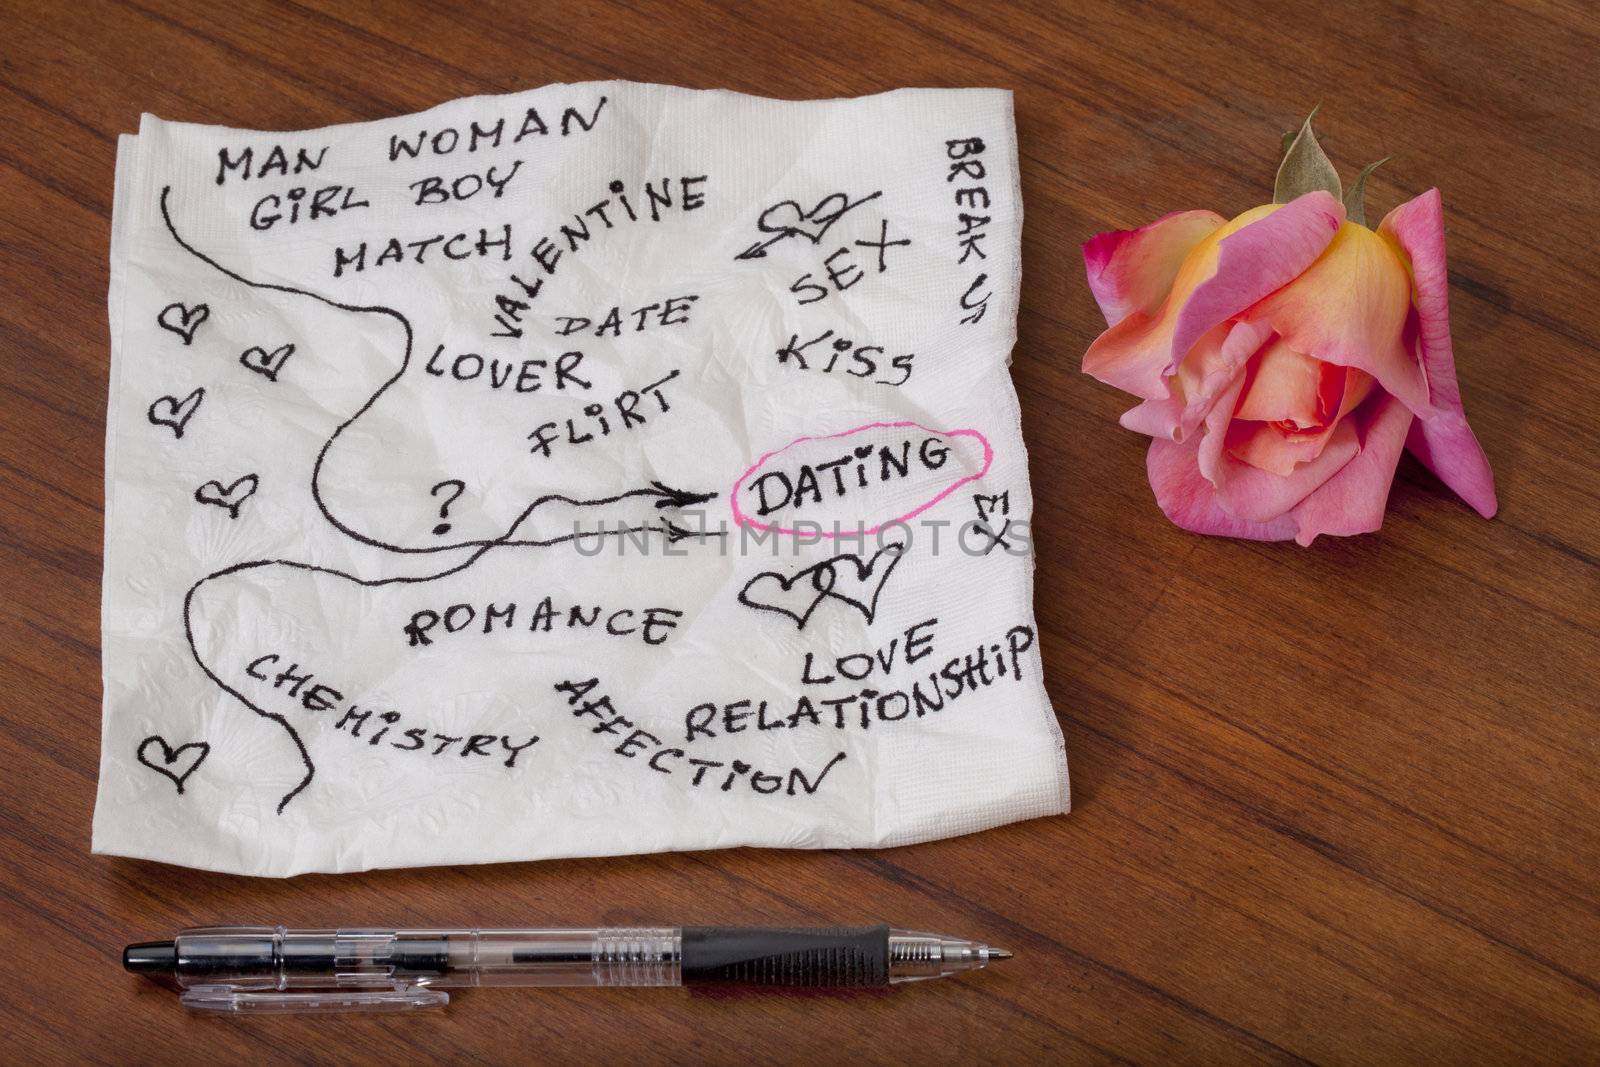 dating and romance - napkin doodle by PixelsAway